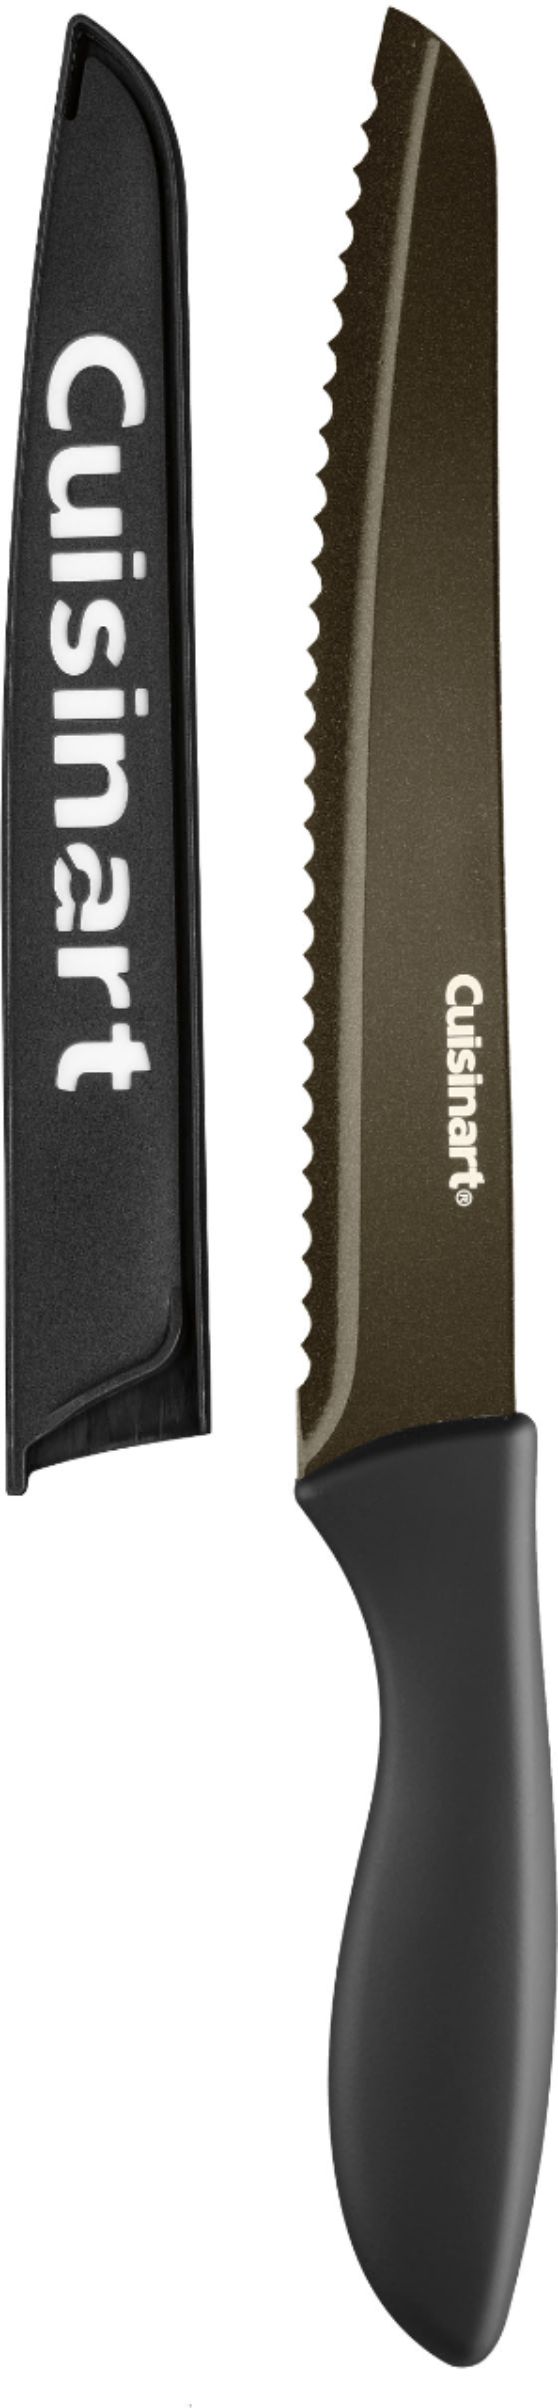 Best Buy: Cuisinart 12pc Coated Knife Set with Blade Guards Black